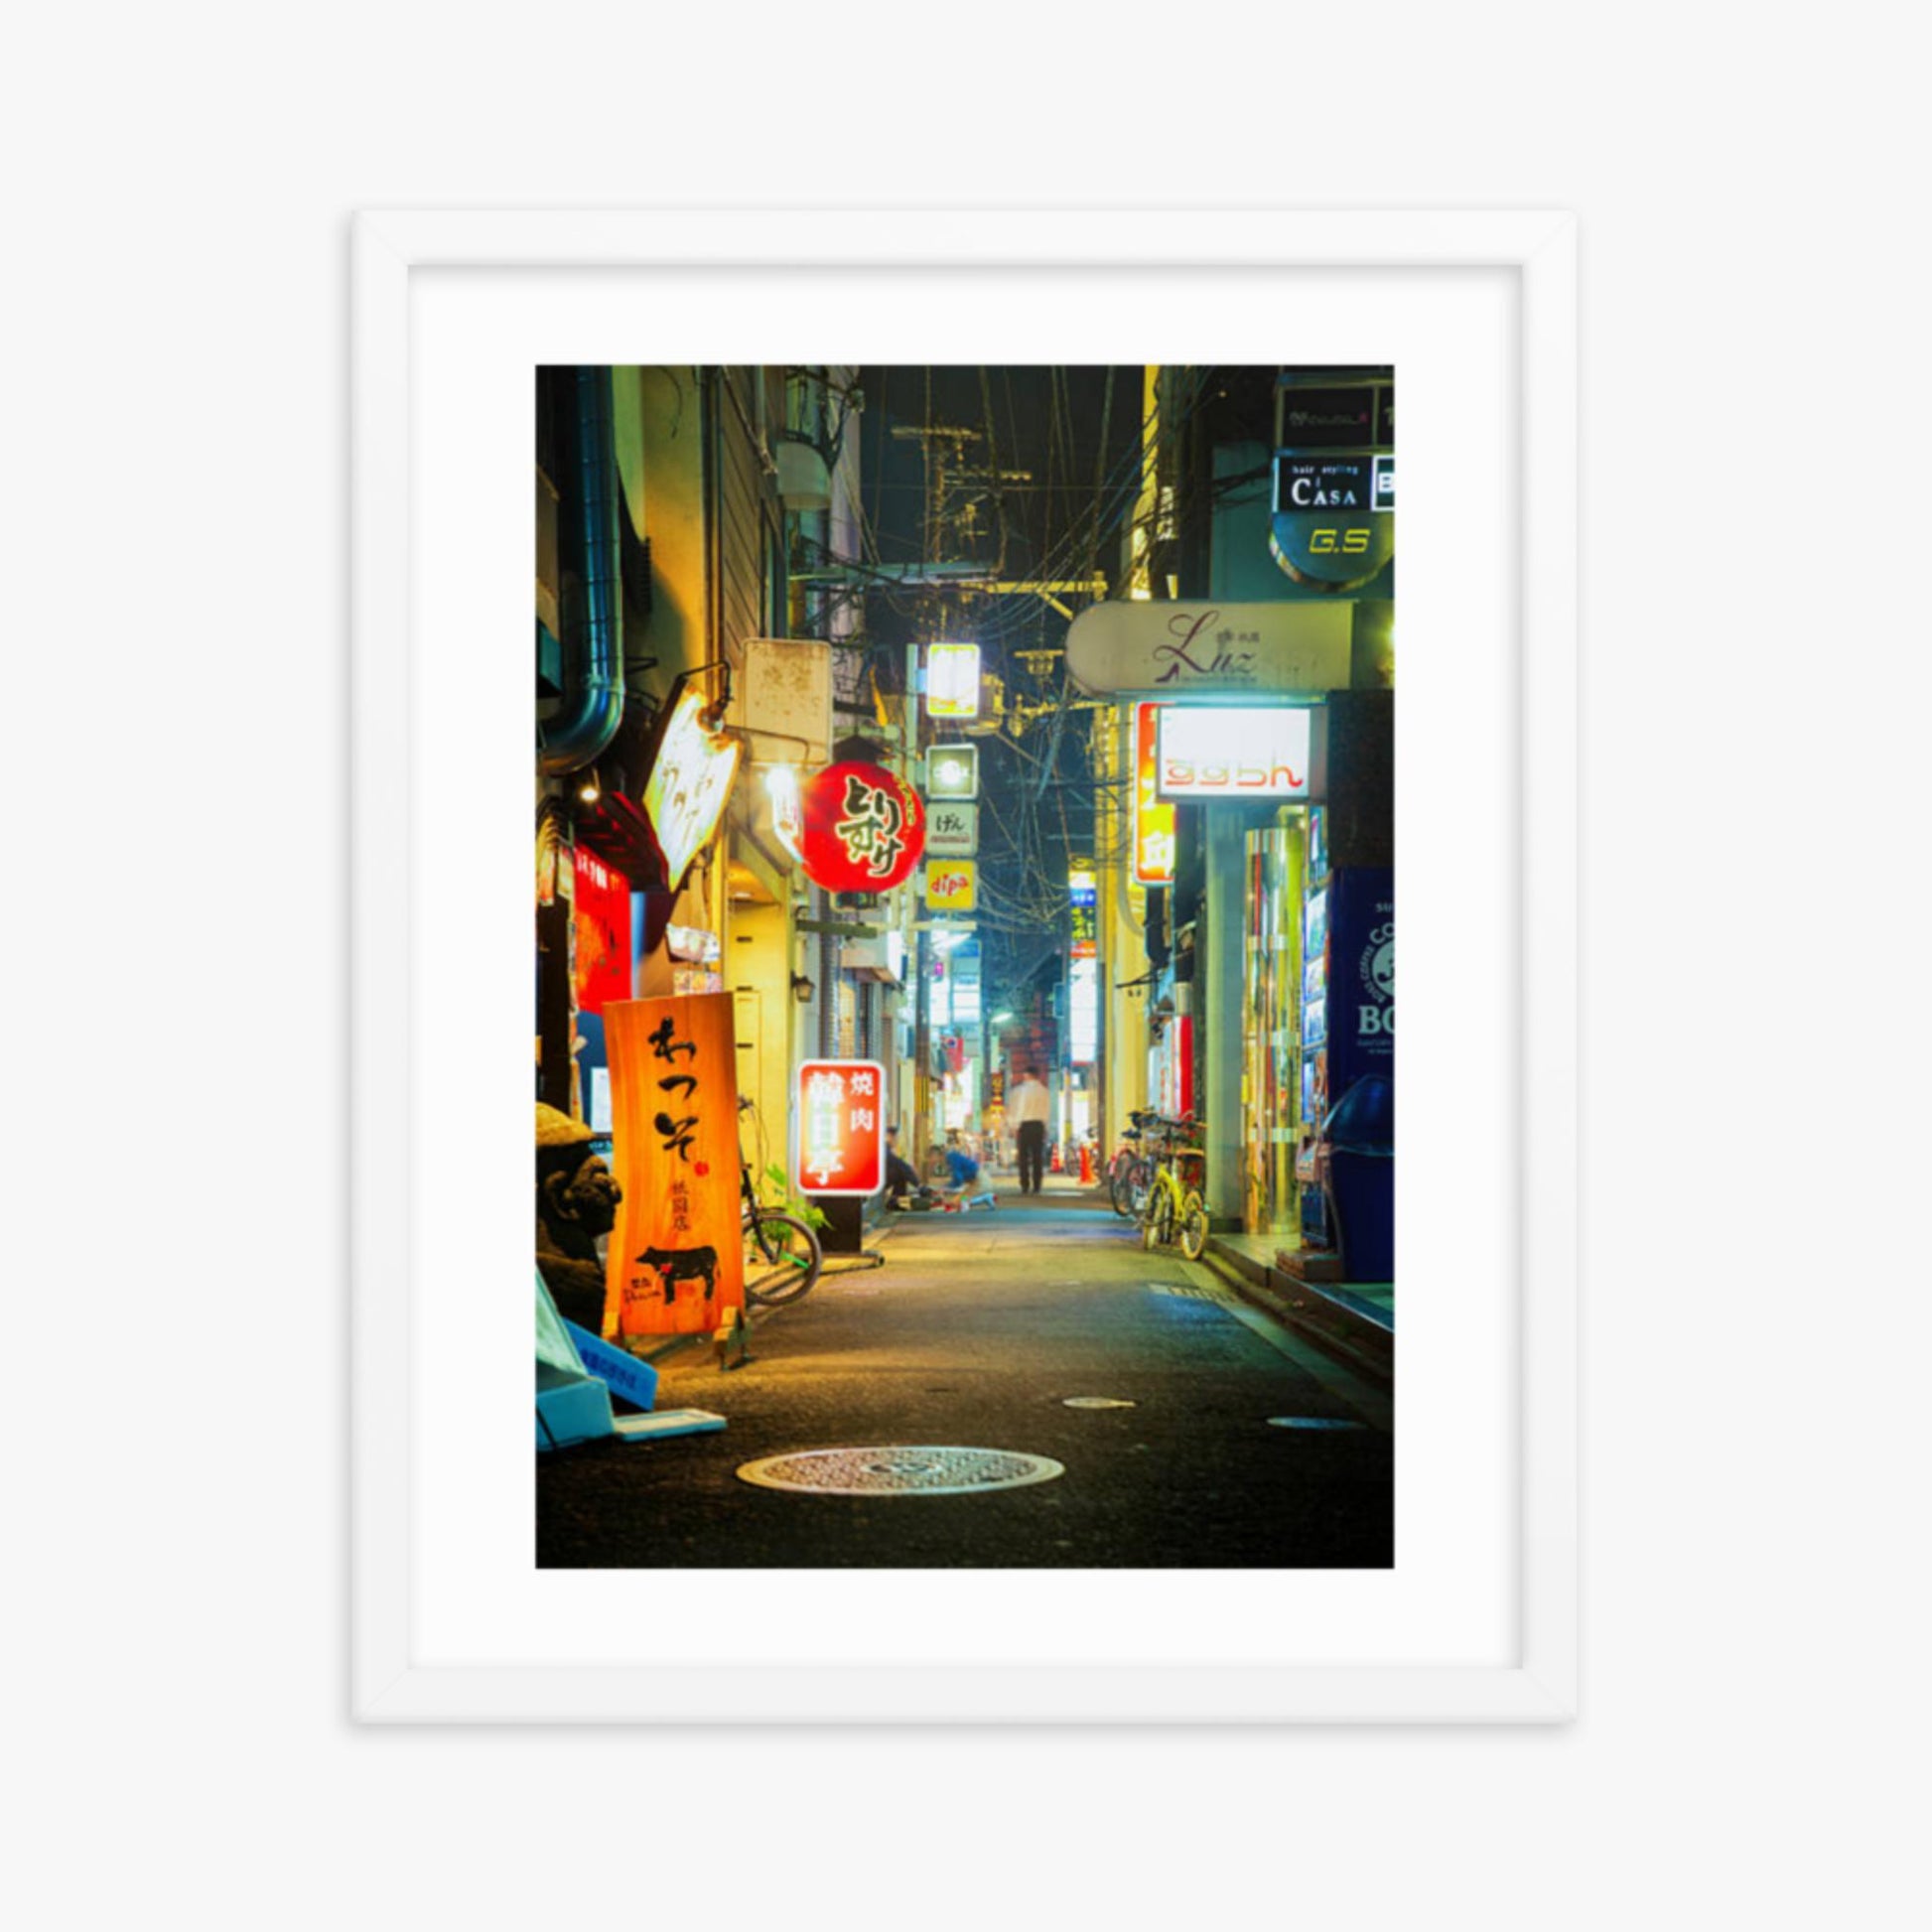 Kyoto, Japan backstreet at night 16x20 in Poster With White Frame